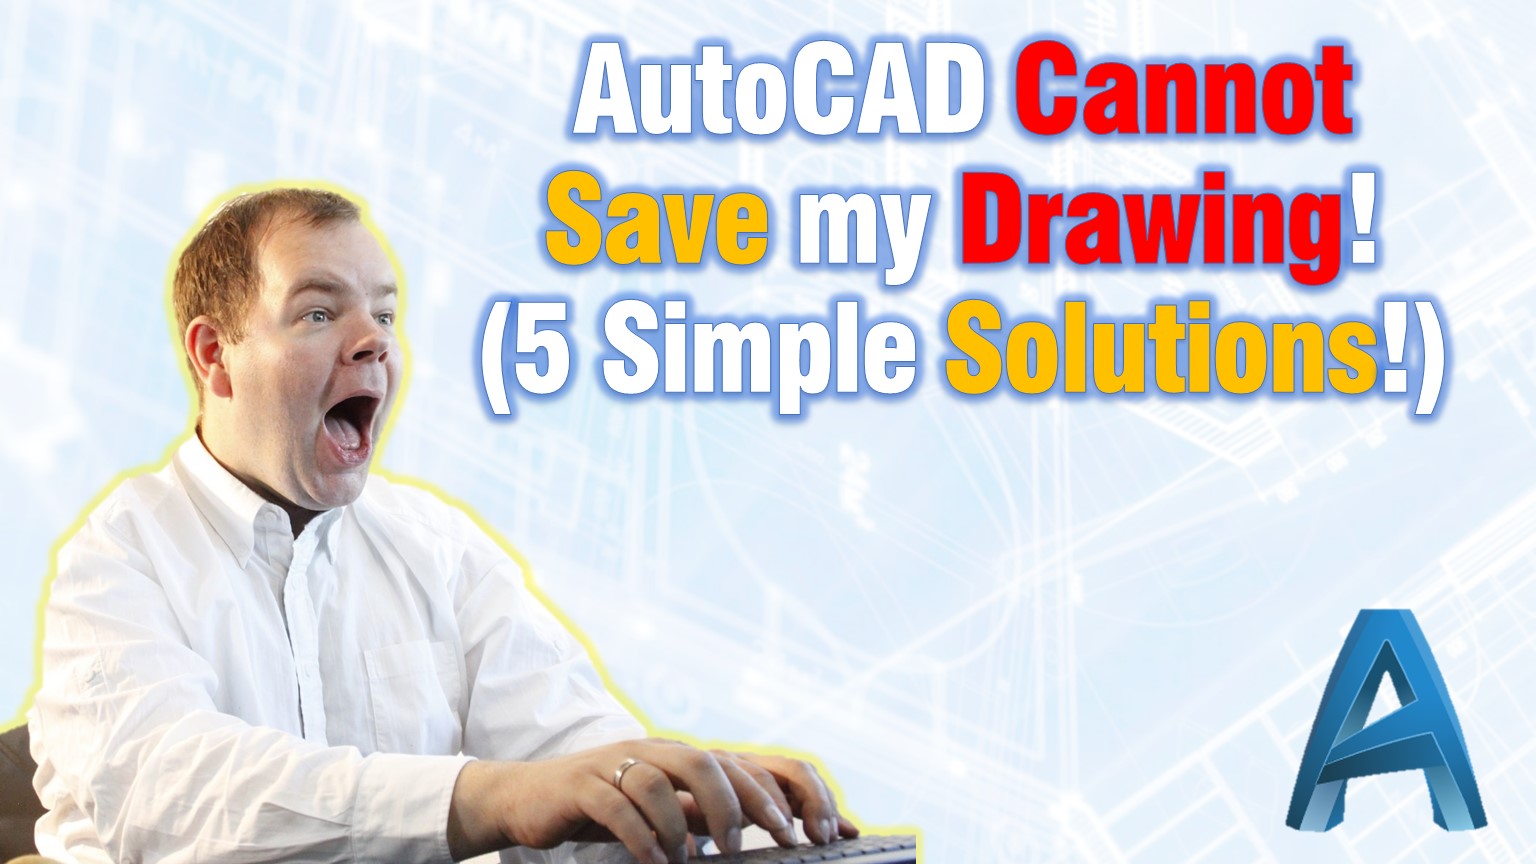 AutoCAD Won't save your drawing? The solution is here!